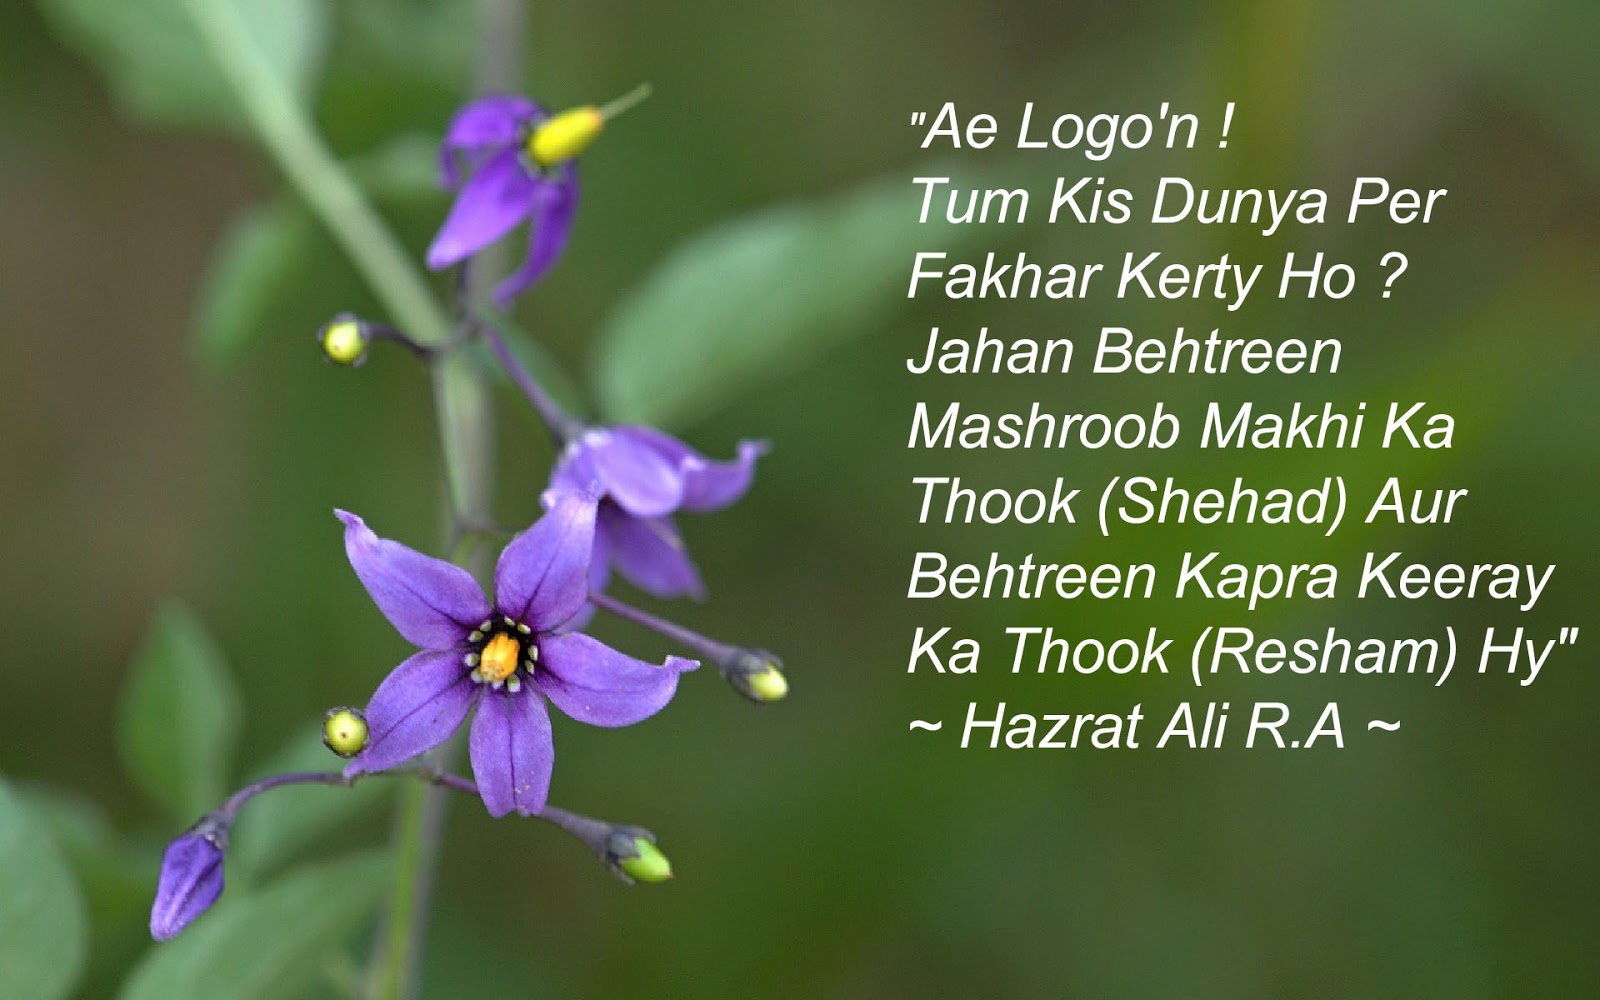 Hazrat Ali R A Quotes About Life